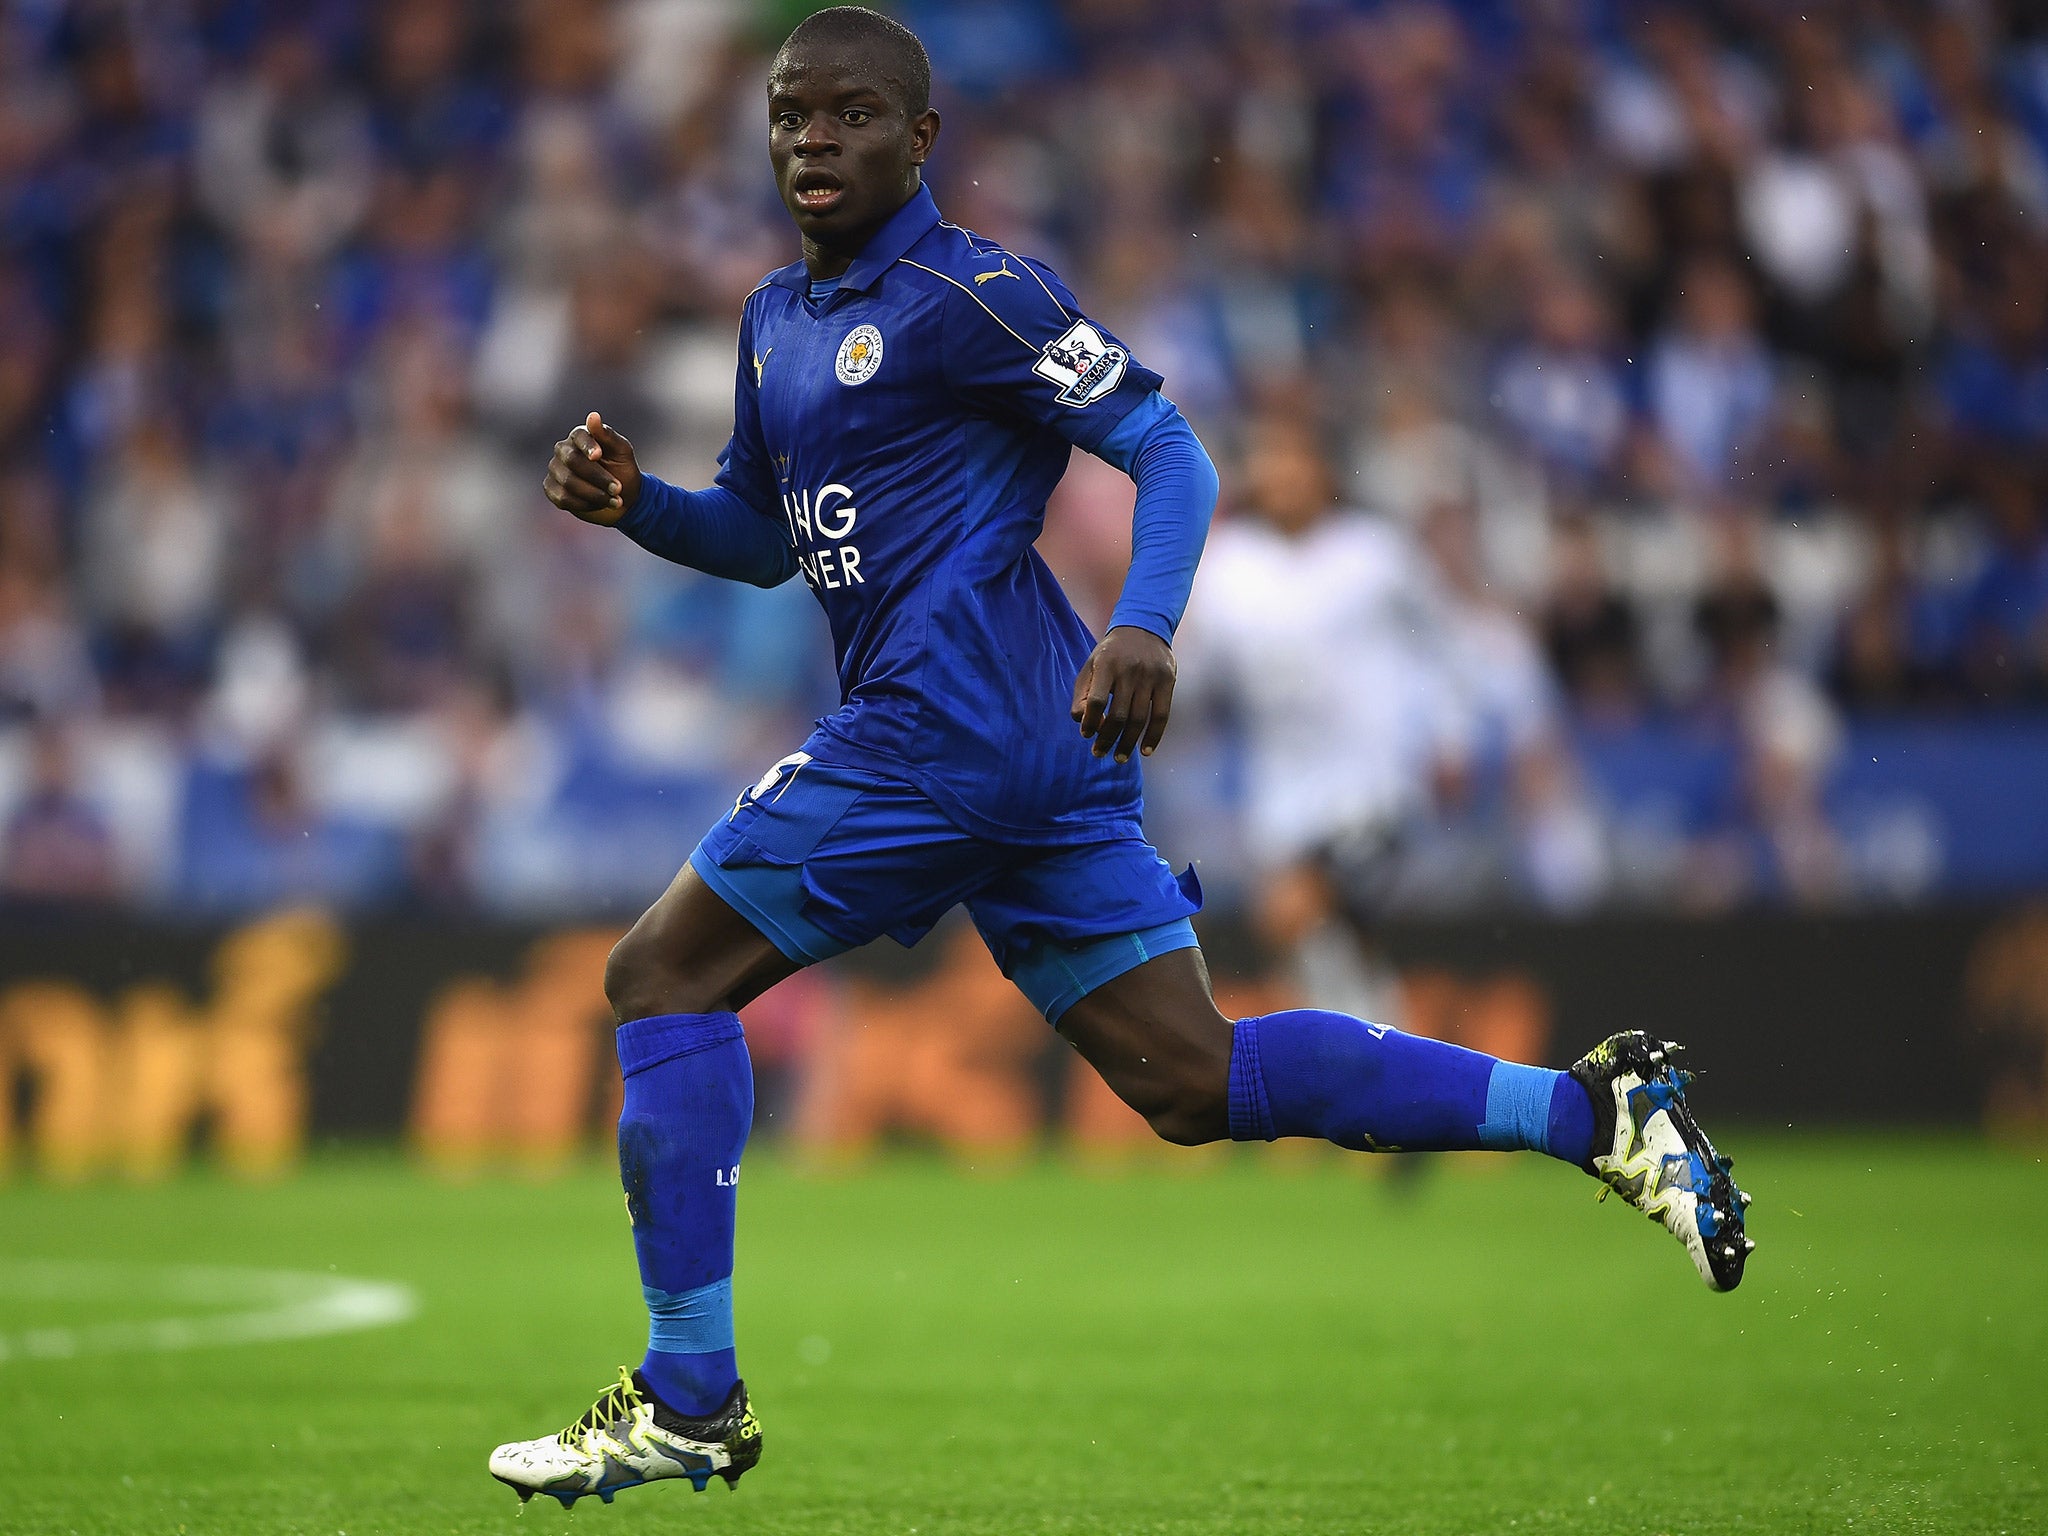 N'Golo Kante is a reported transfer target for Arsenal